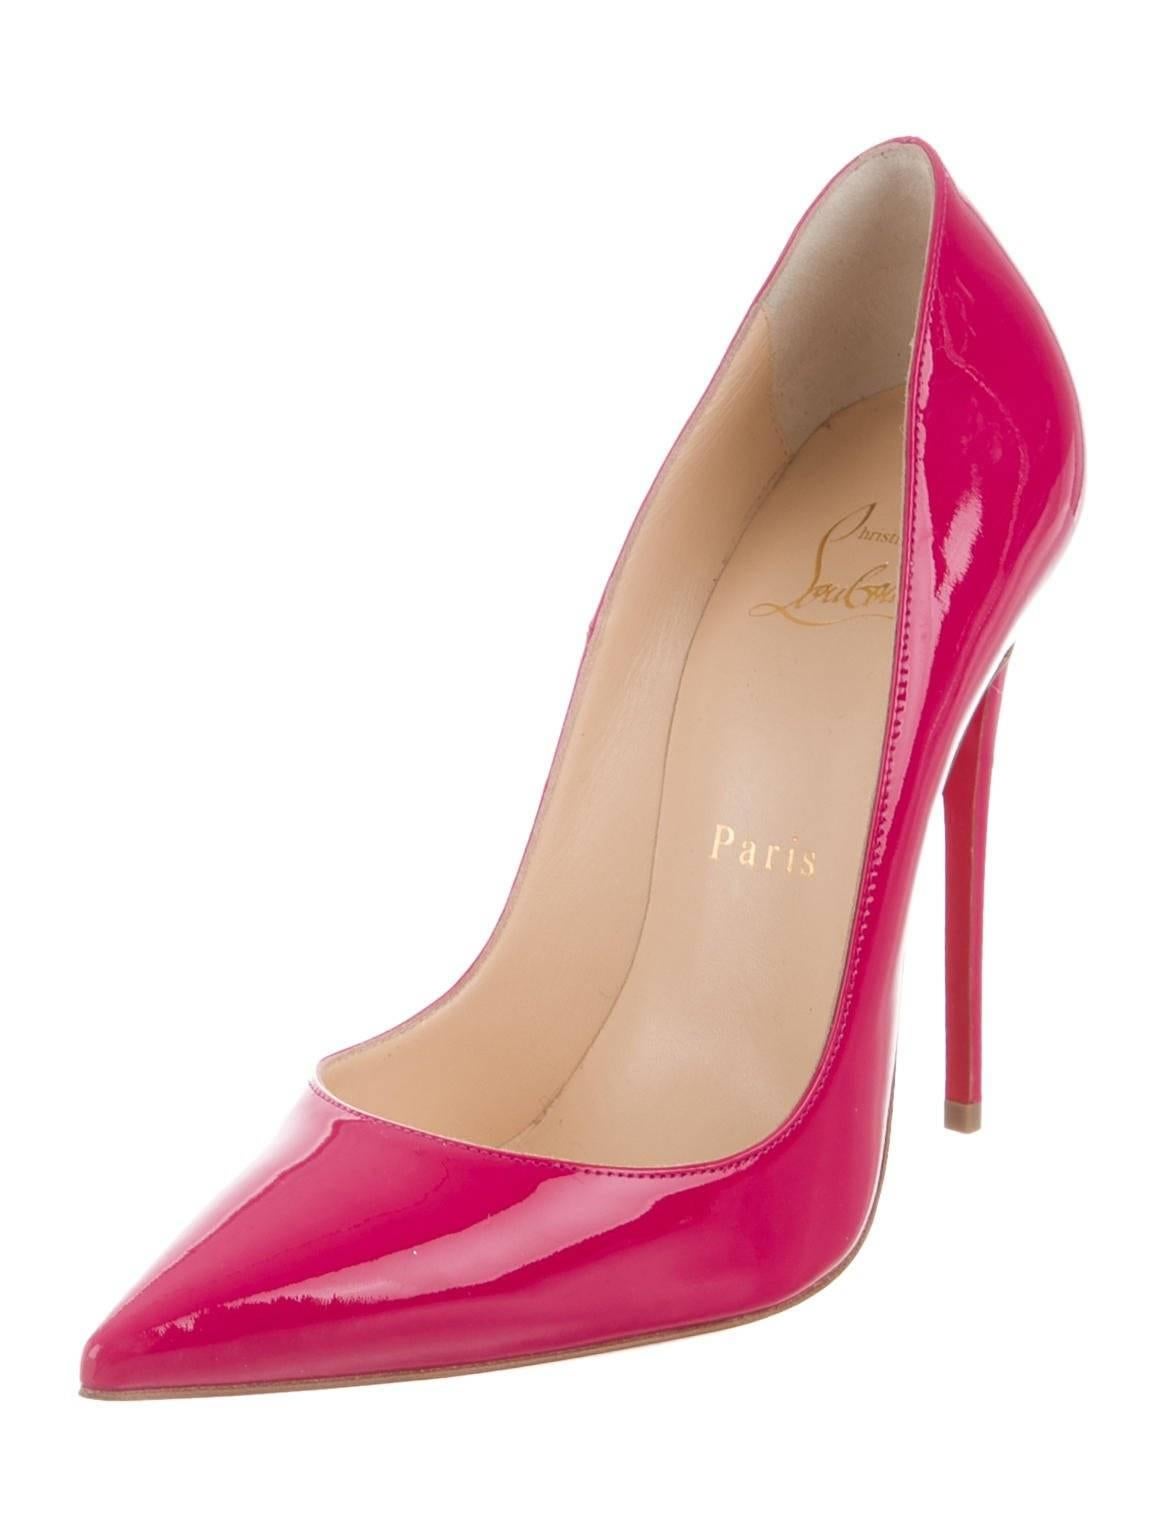 Christian Louboutin New Fuchsia Patent Leather Pigalle Evening High Heels Pumps in Box  

Size IT 36.5
Patent leather 
Slip on
Made in Italy
Heel height 4.5